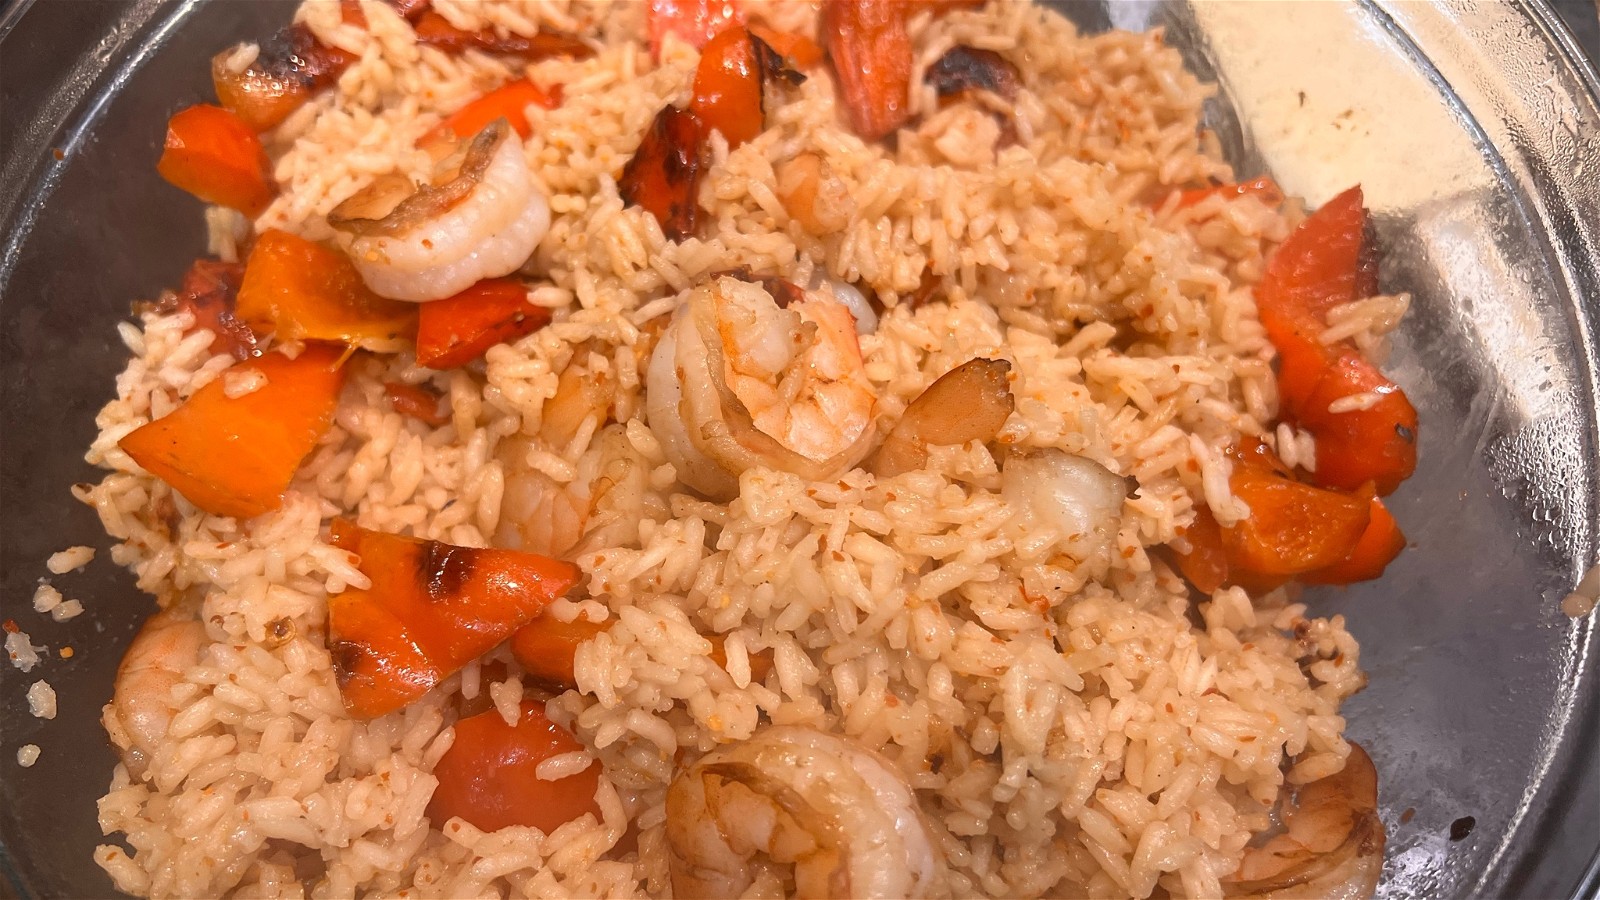 Image of Smoked Rice With Shrimp and Smooth and Spicy Almond Sauce